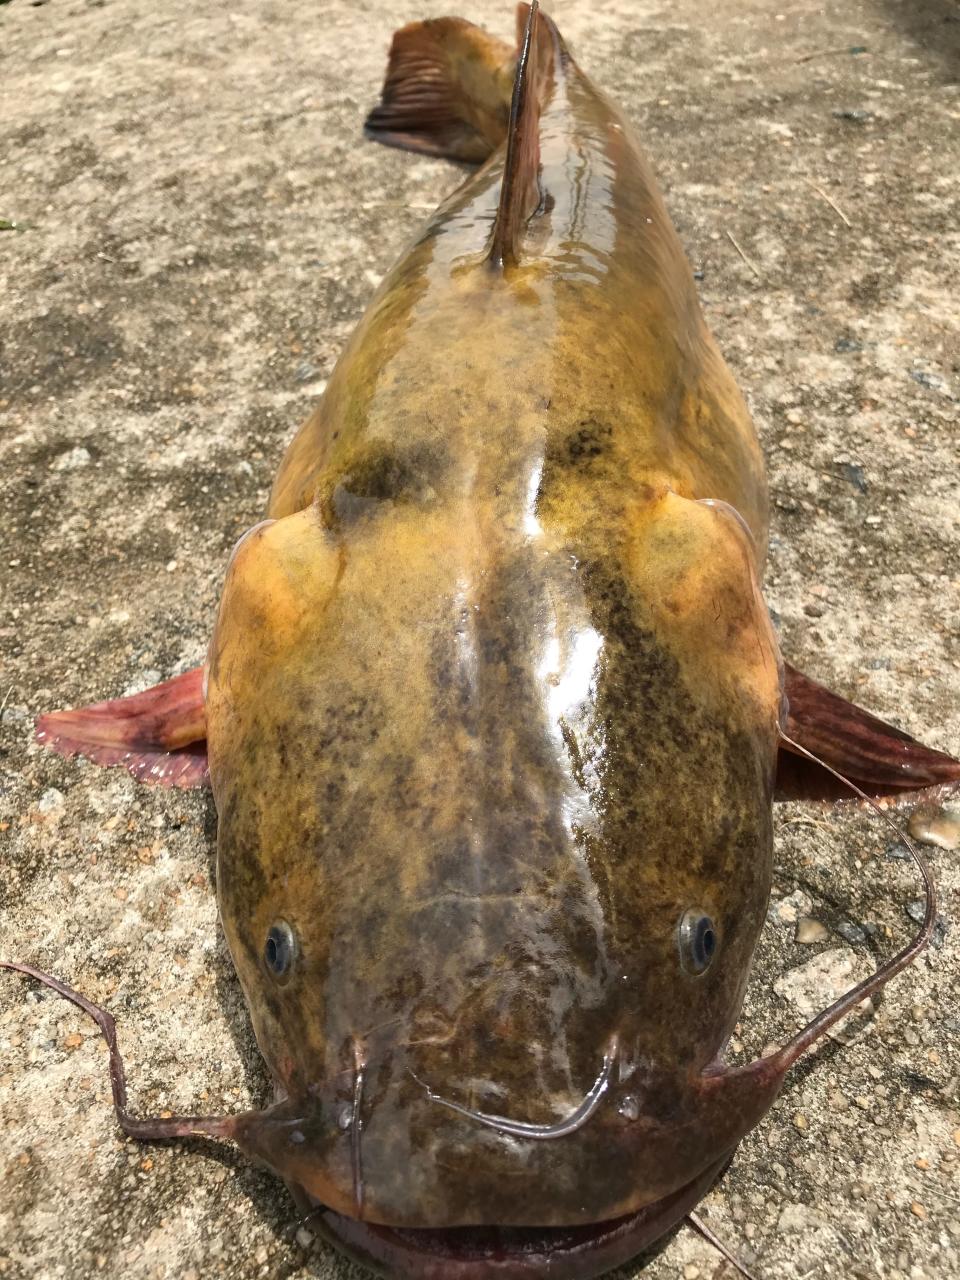 Georgia Department of Natural Resources’ Wildlife Resources Division captured a non-native Flathead catfish in the Ogeechee River.